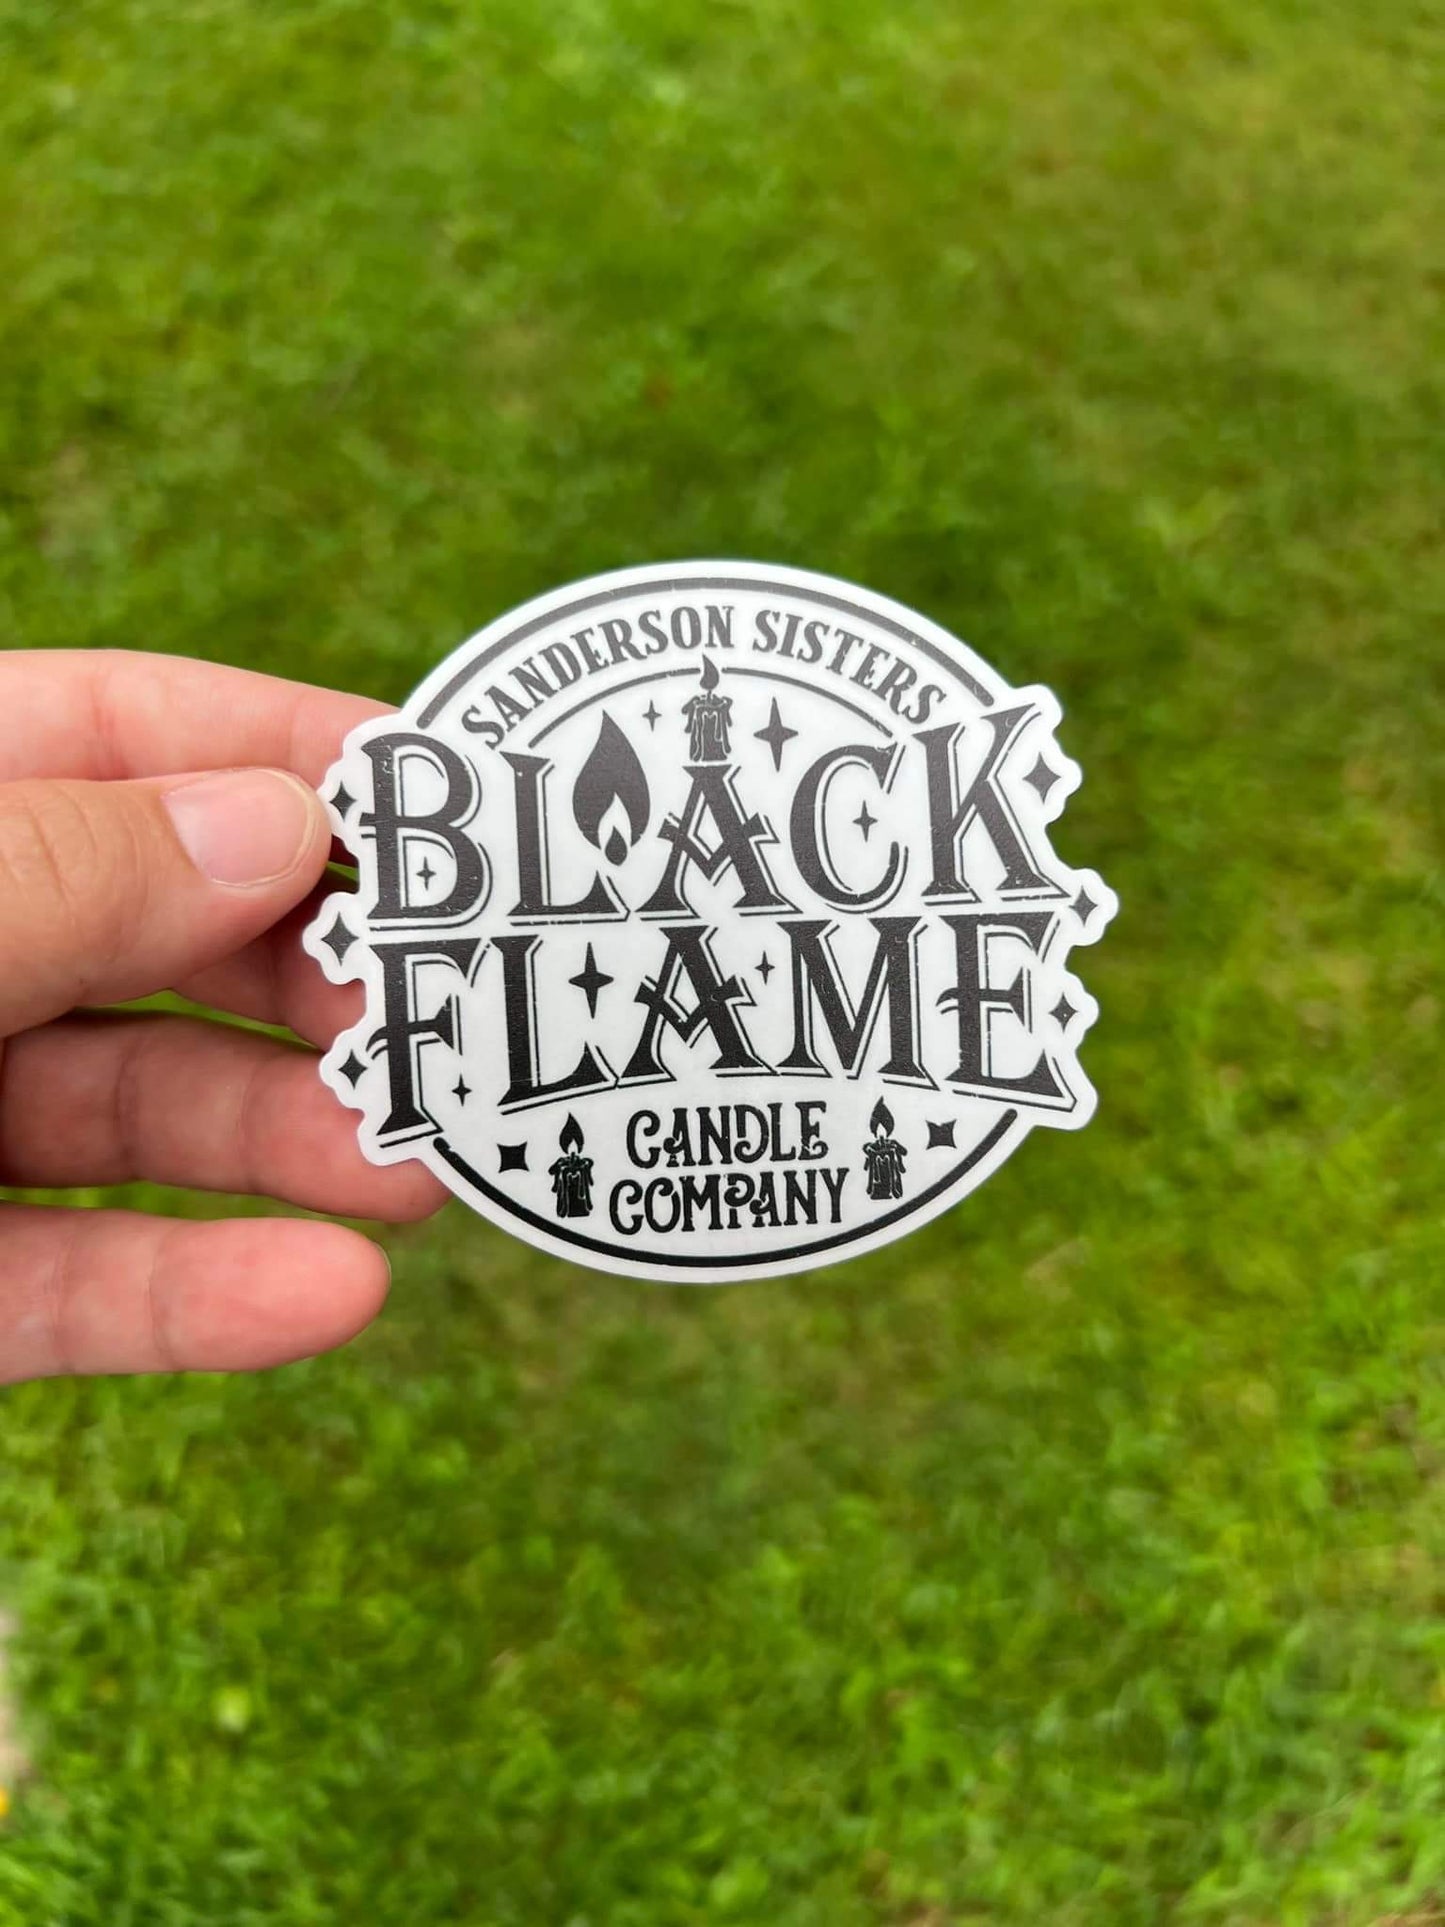 Sanderson Sisters Black Flame Candle Company Transparent Background Waterproof Sticker